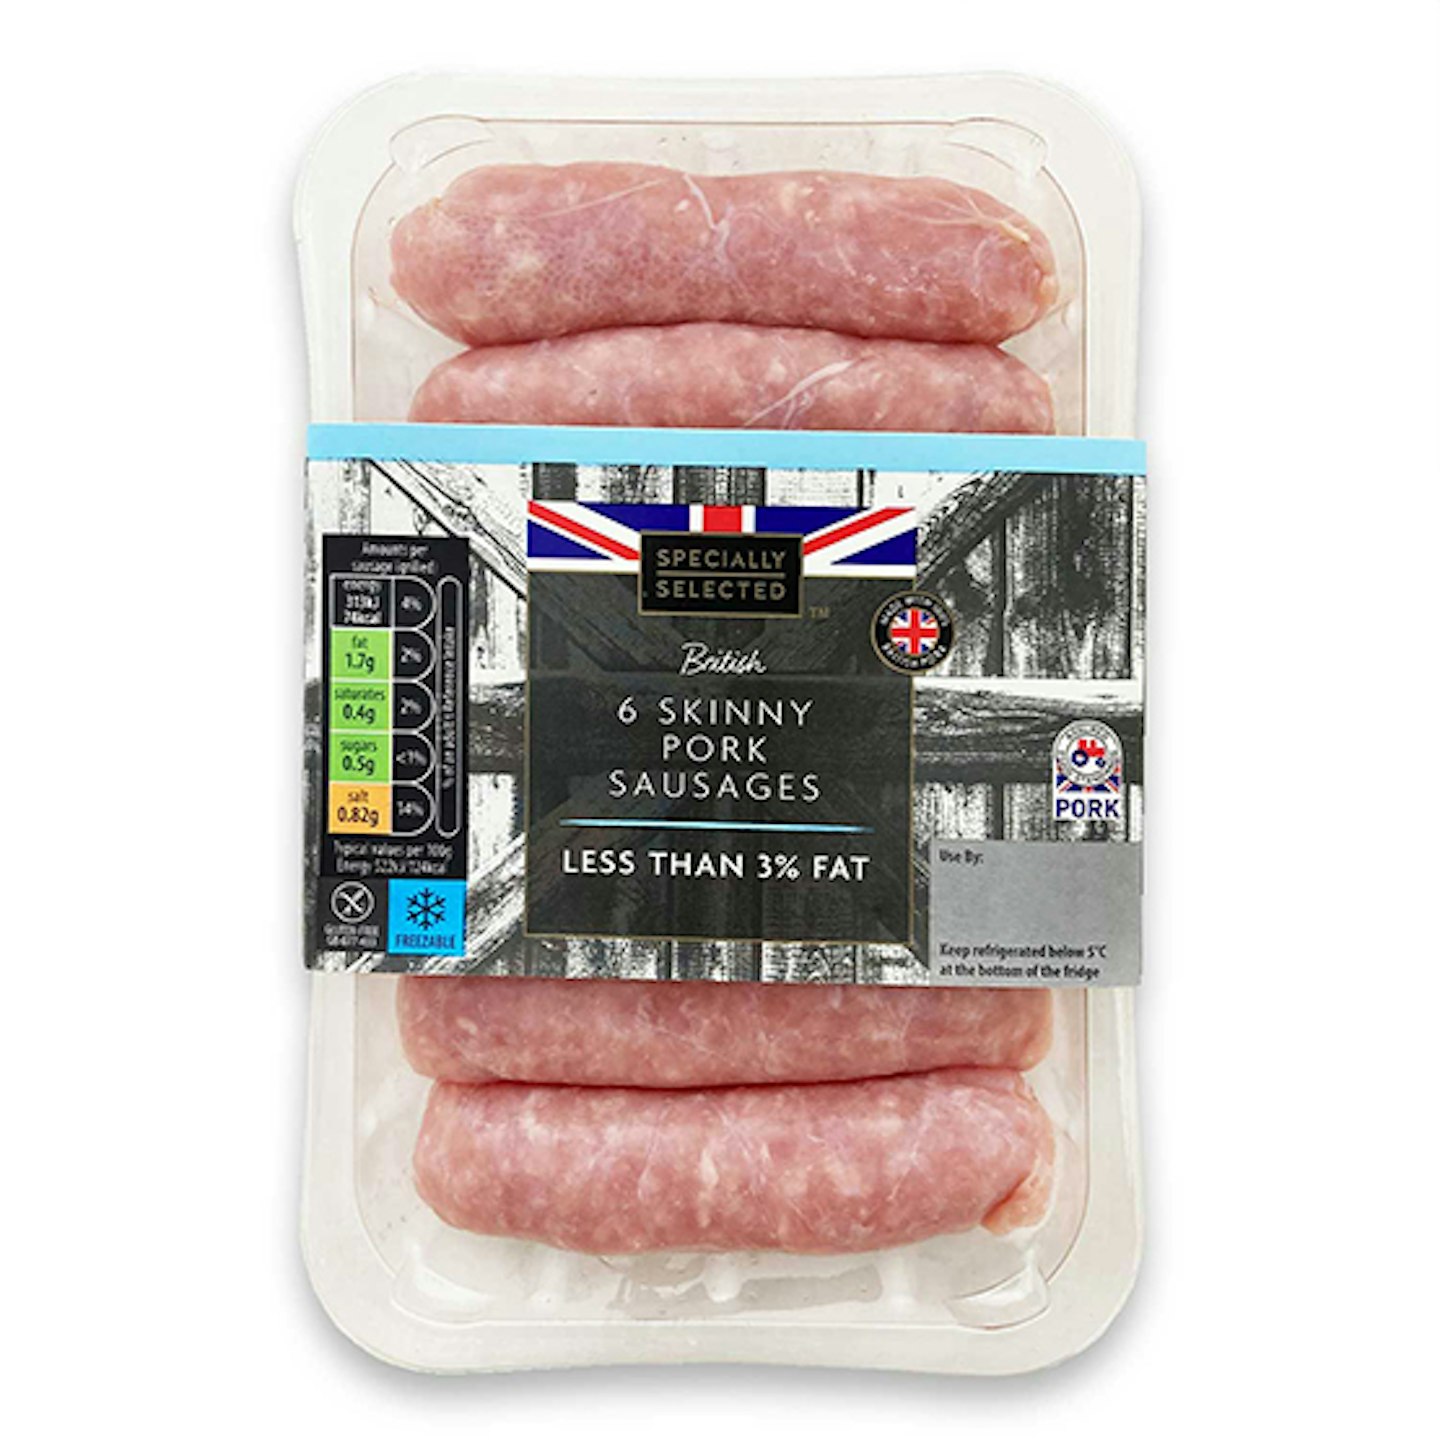 Specially Selected British 6 Skinny Pork Sausages